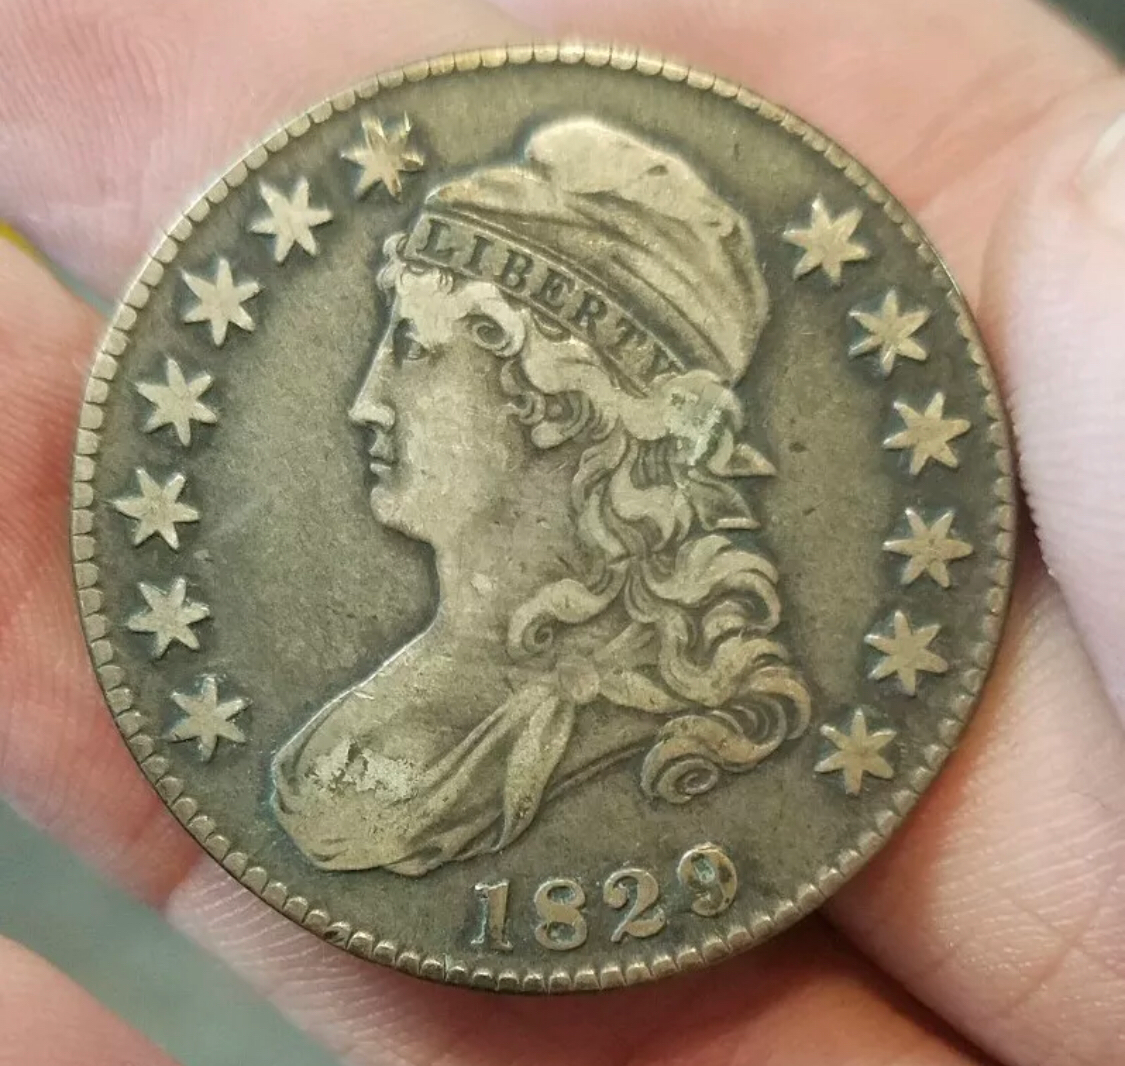 Old bust half dollar in circulated condition